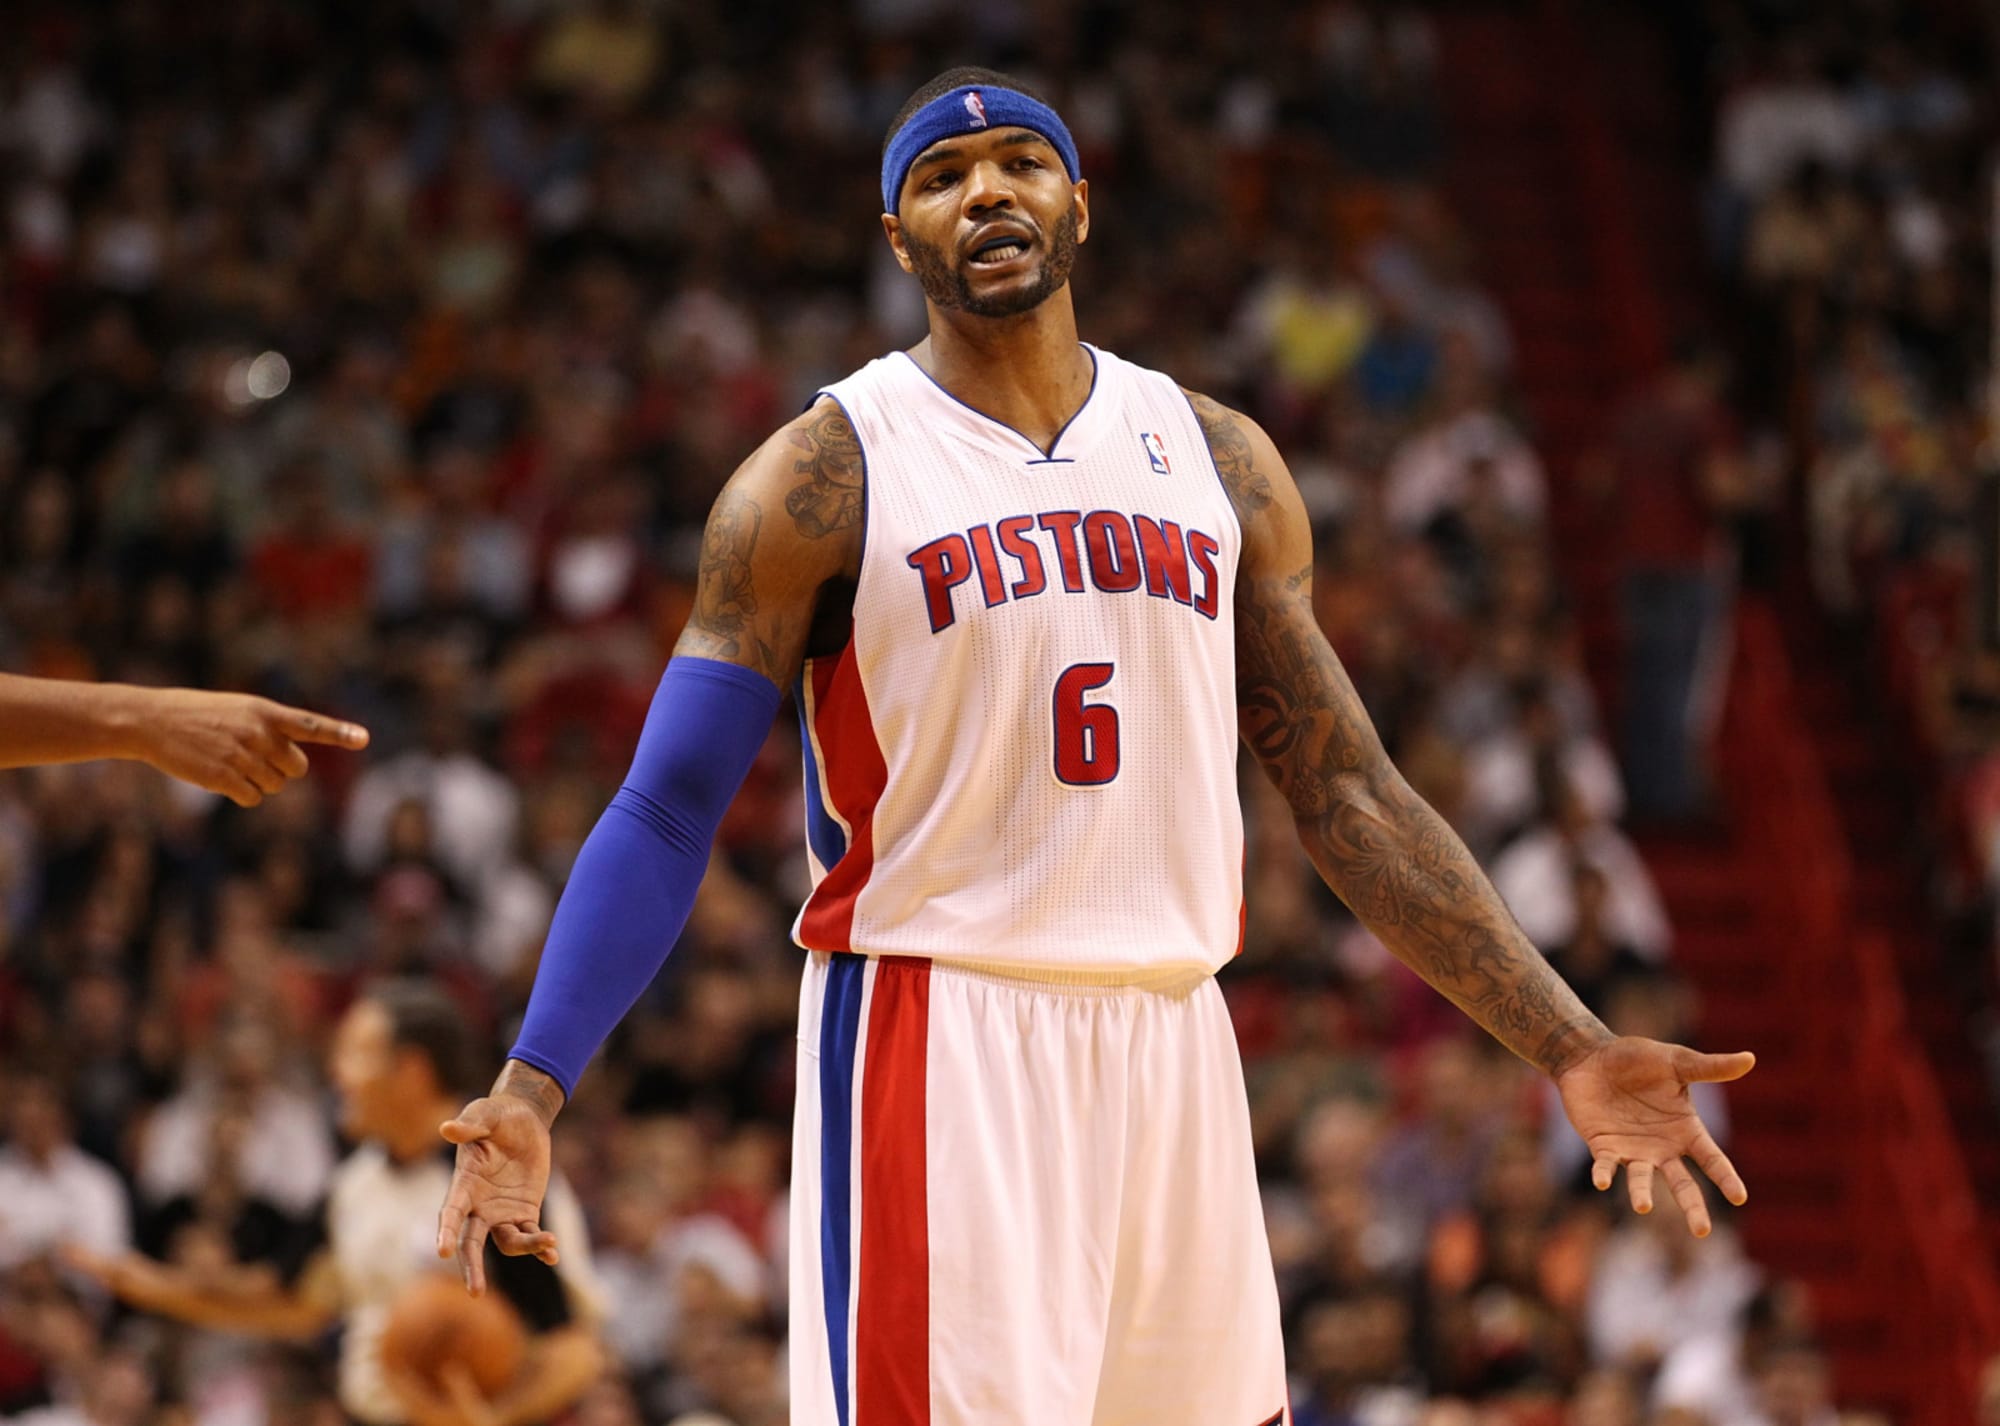 Detroit Pistons The 5 worst free agent signings in history